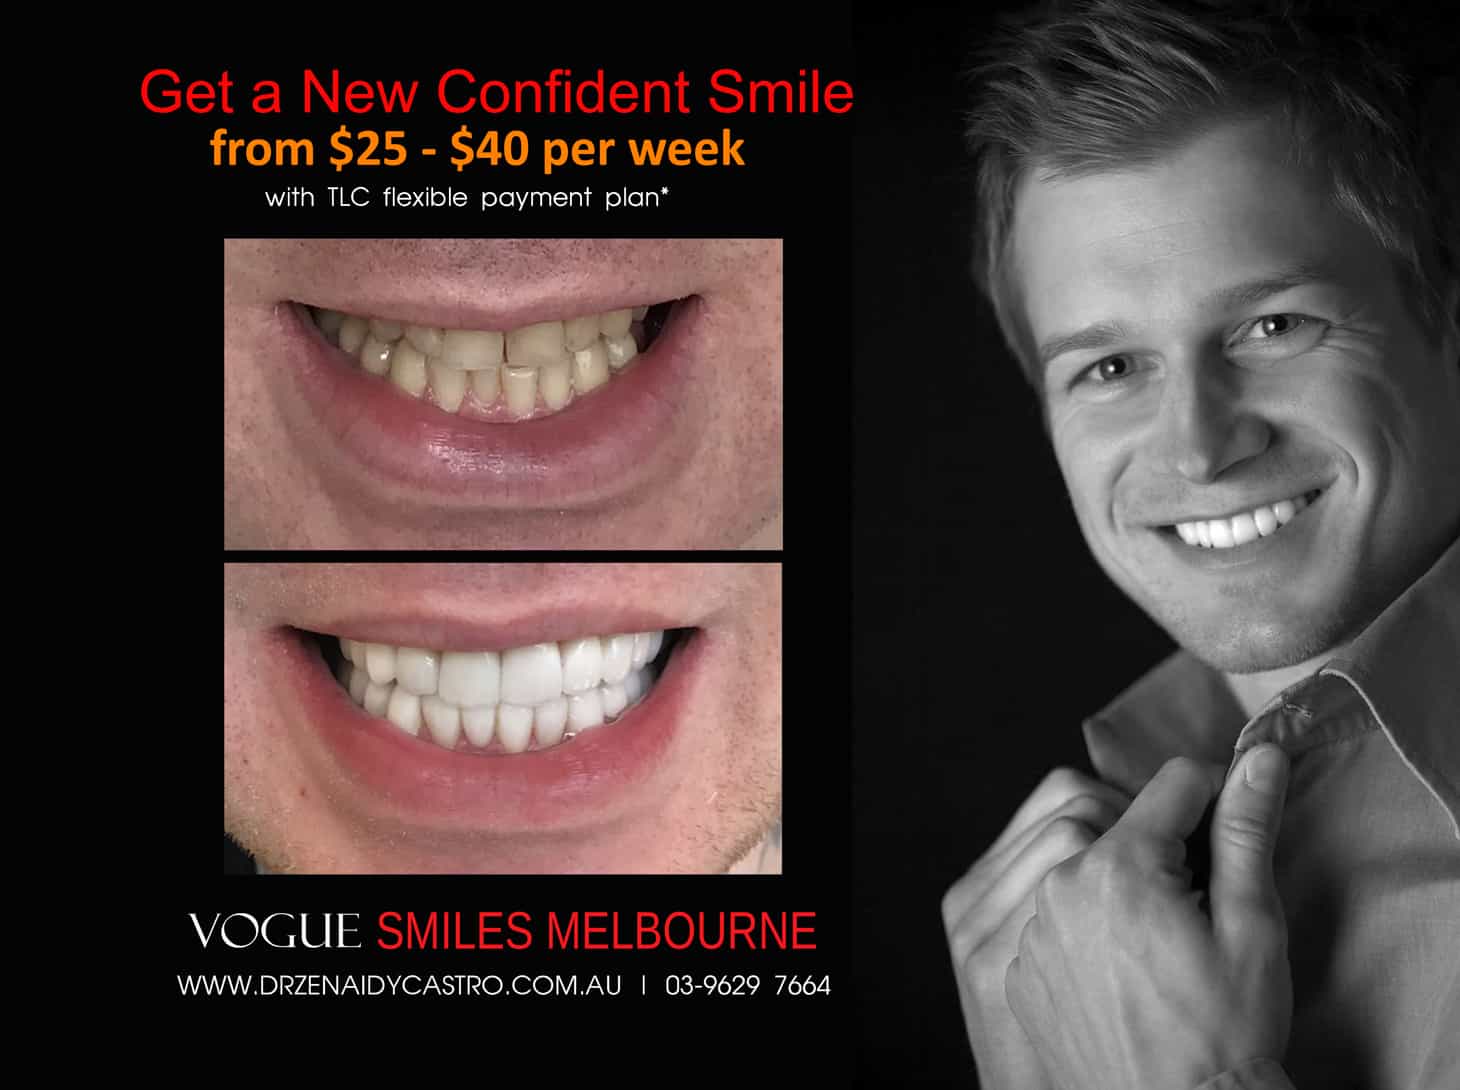 At-home Teeth Whitening Kits or Take-Home Whitening Melbourne CBD -affordable teeth whitening in Melbourne